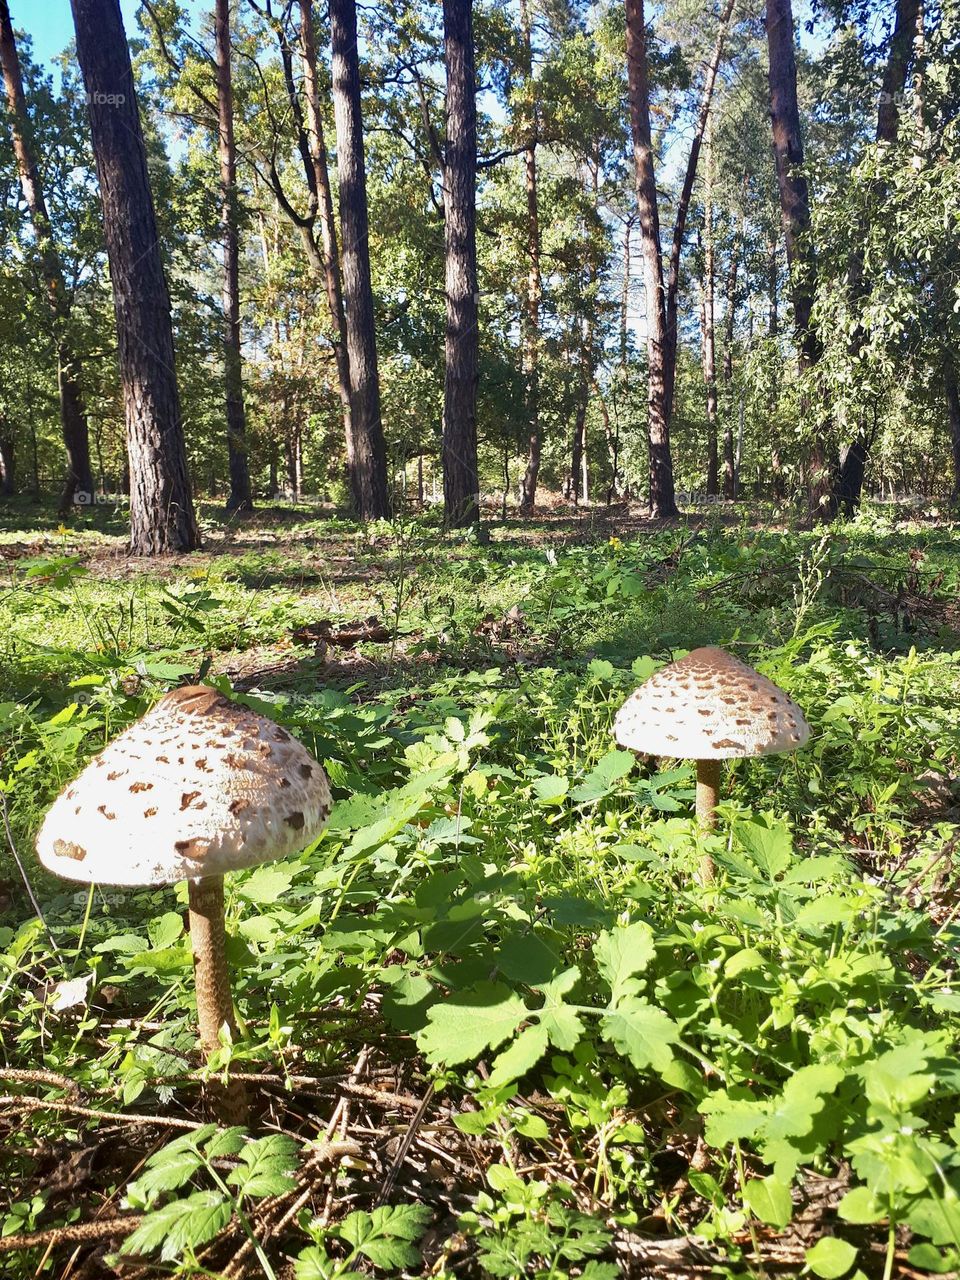 Big mushrooms in the forest at sunny day 